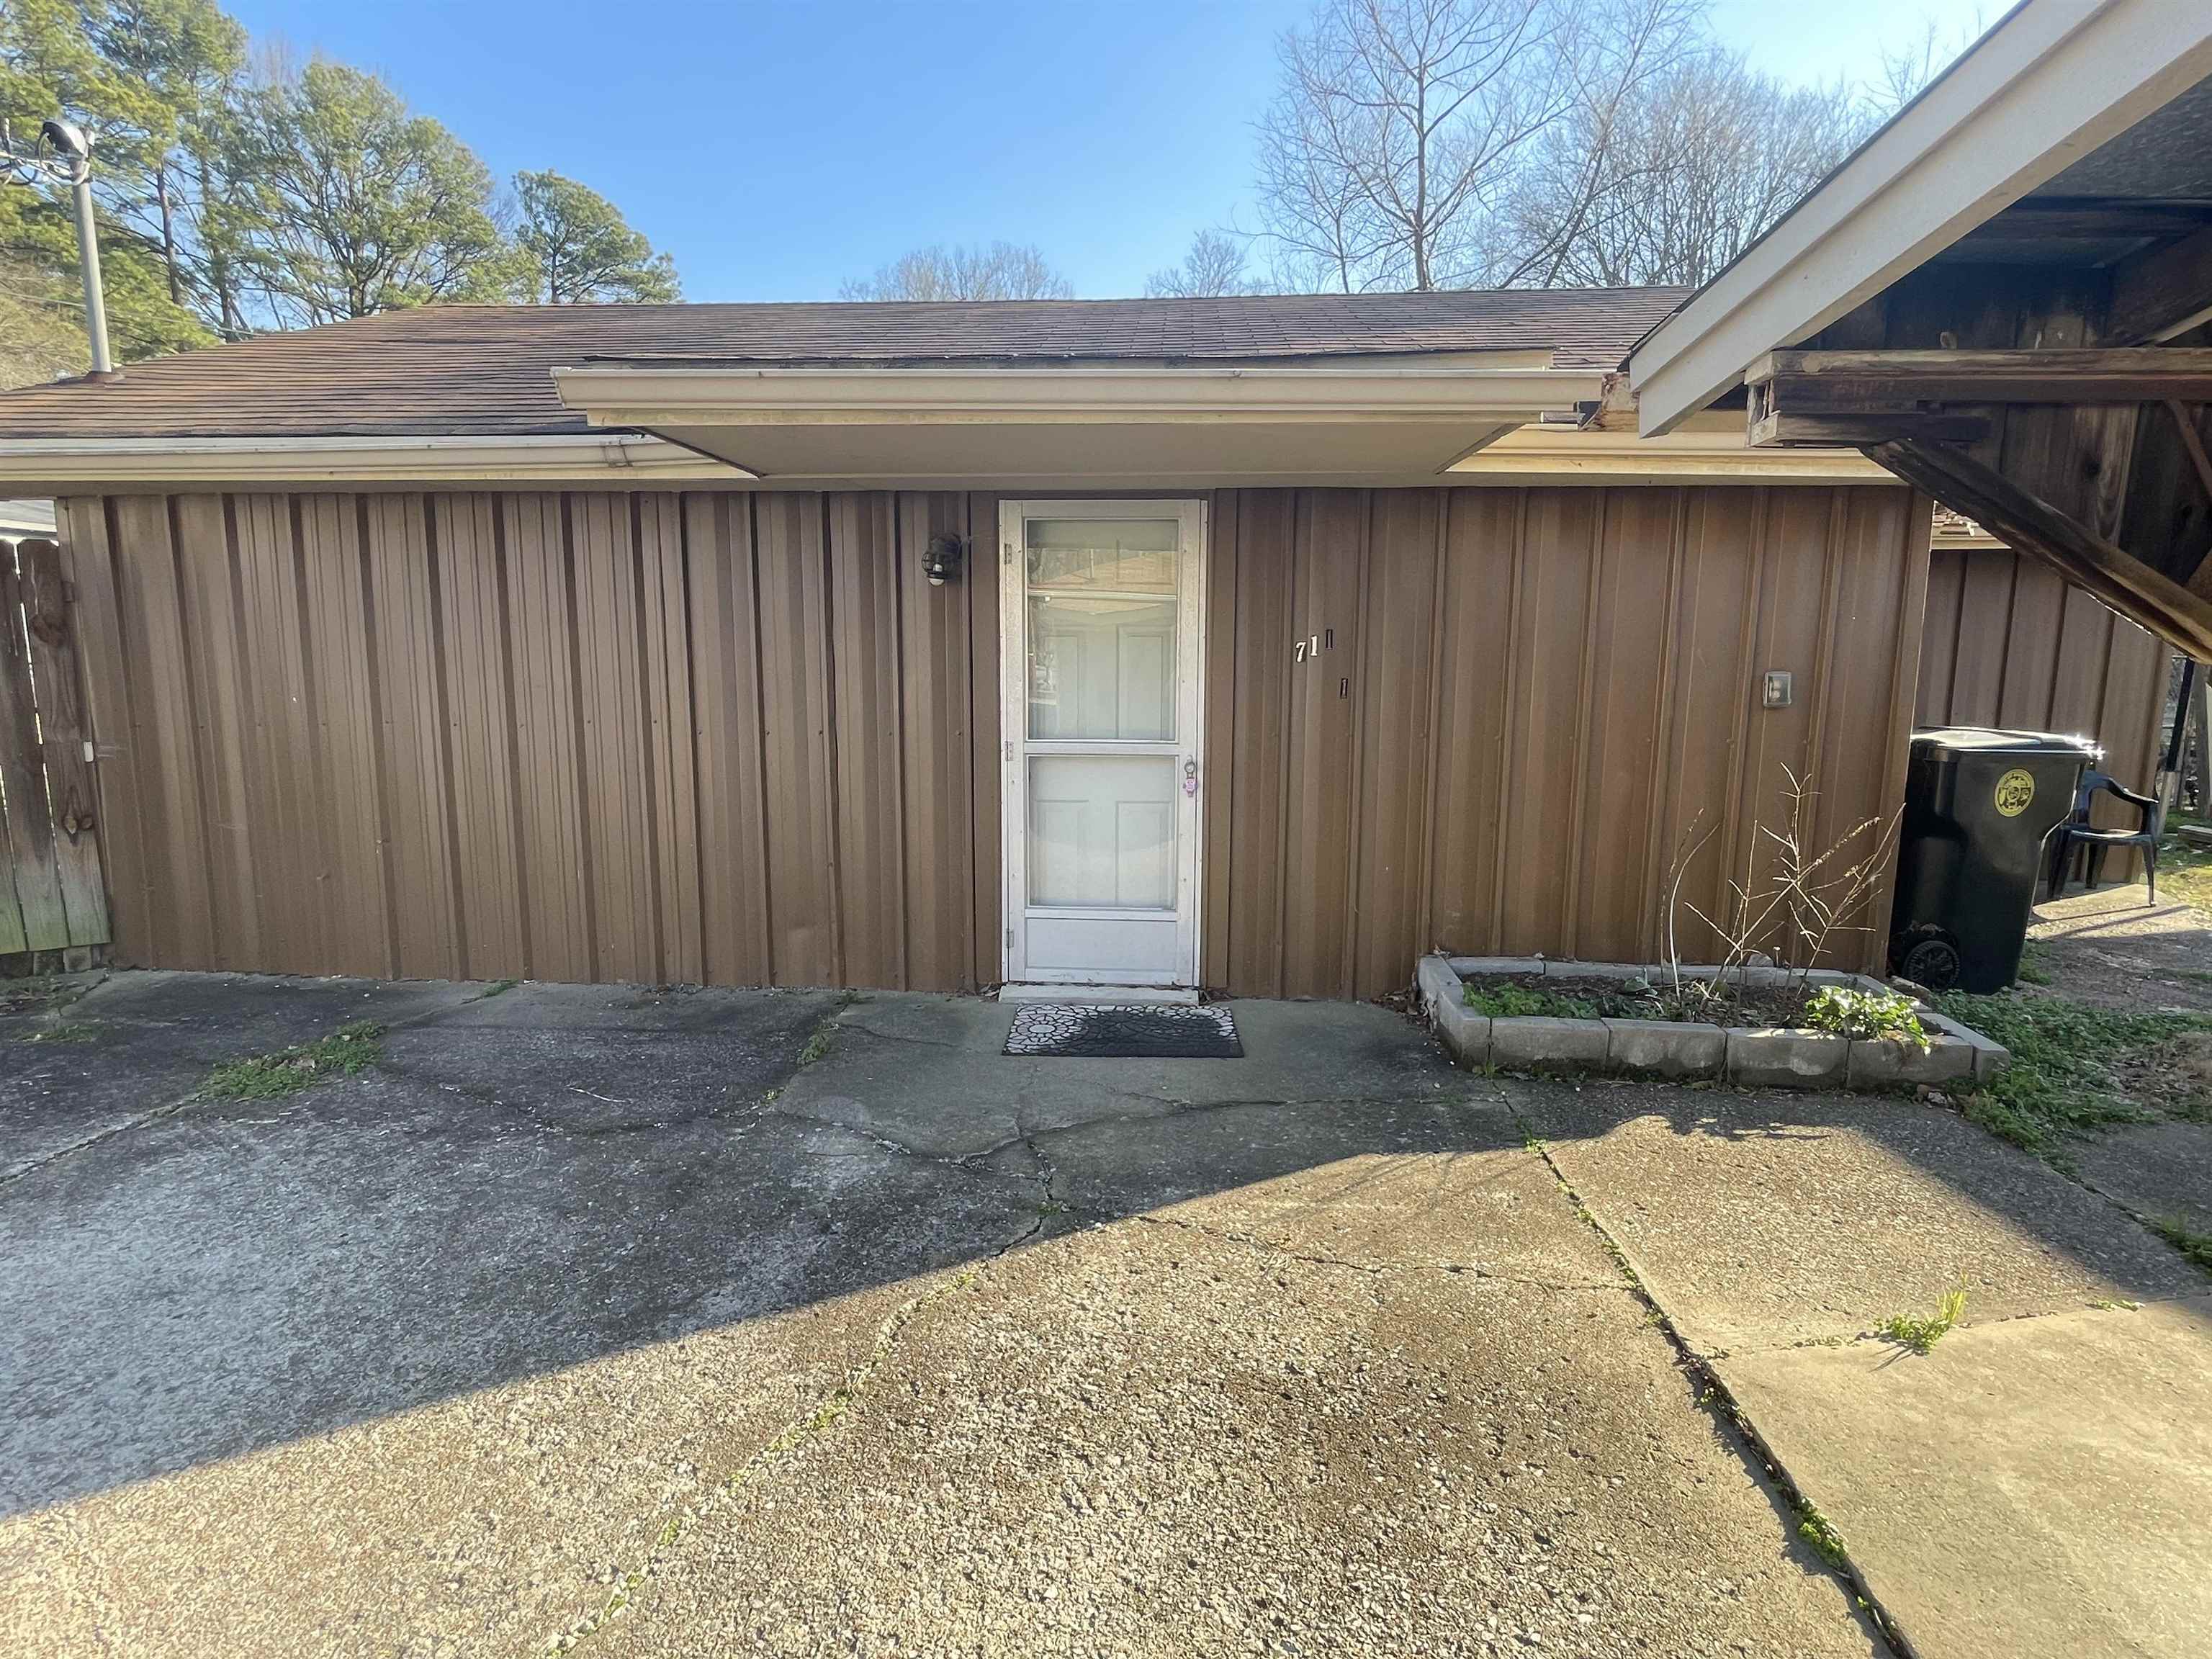 711 E Tickle Street, Dyersburg, Tennessee 38024, 3 Bedrooms Bedrooms, ,1 BathroomBathrooms,Residential,For Sale,711 E Tickle Street,240569